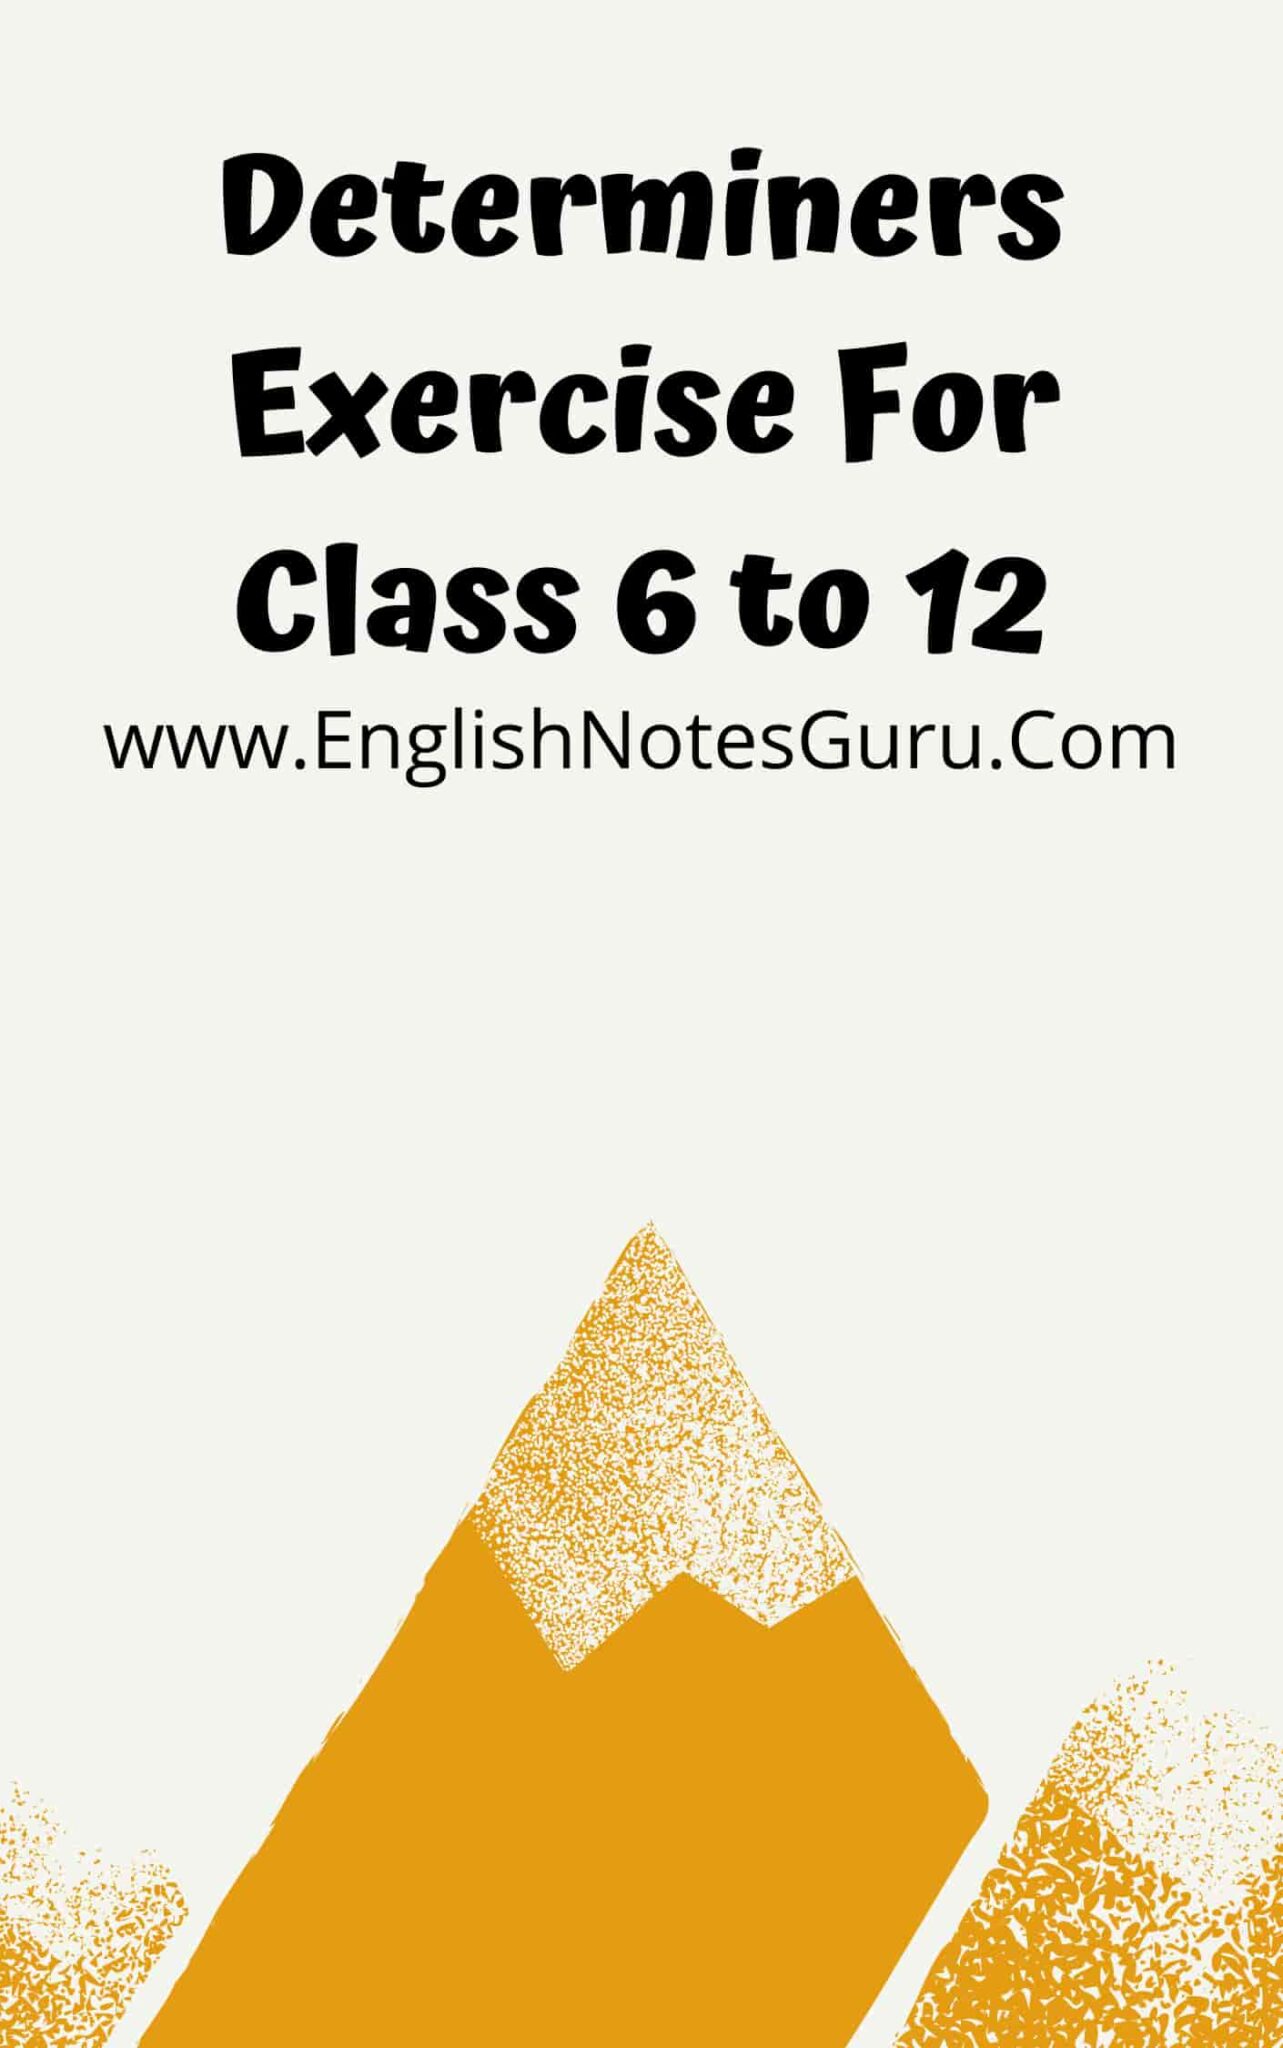 verb-exercises-for-class-7-cbse-with-answers-cbse-sample-papers